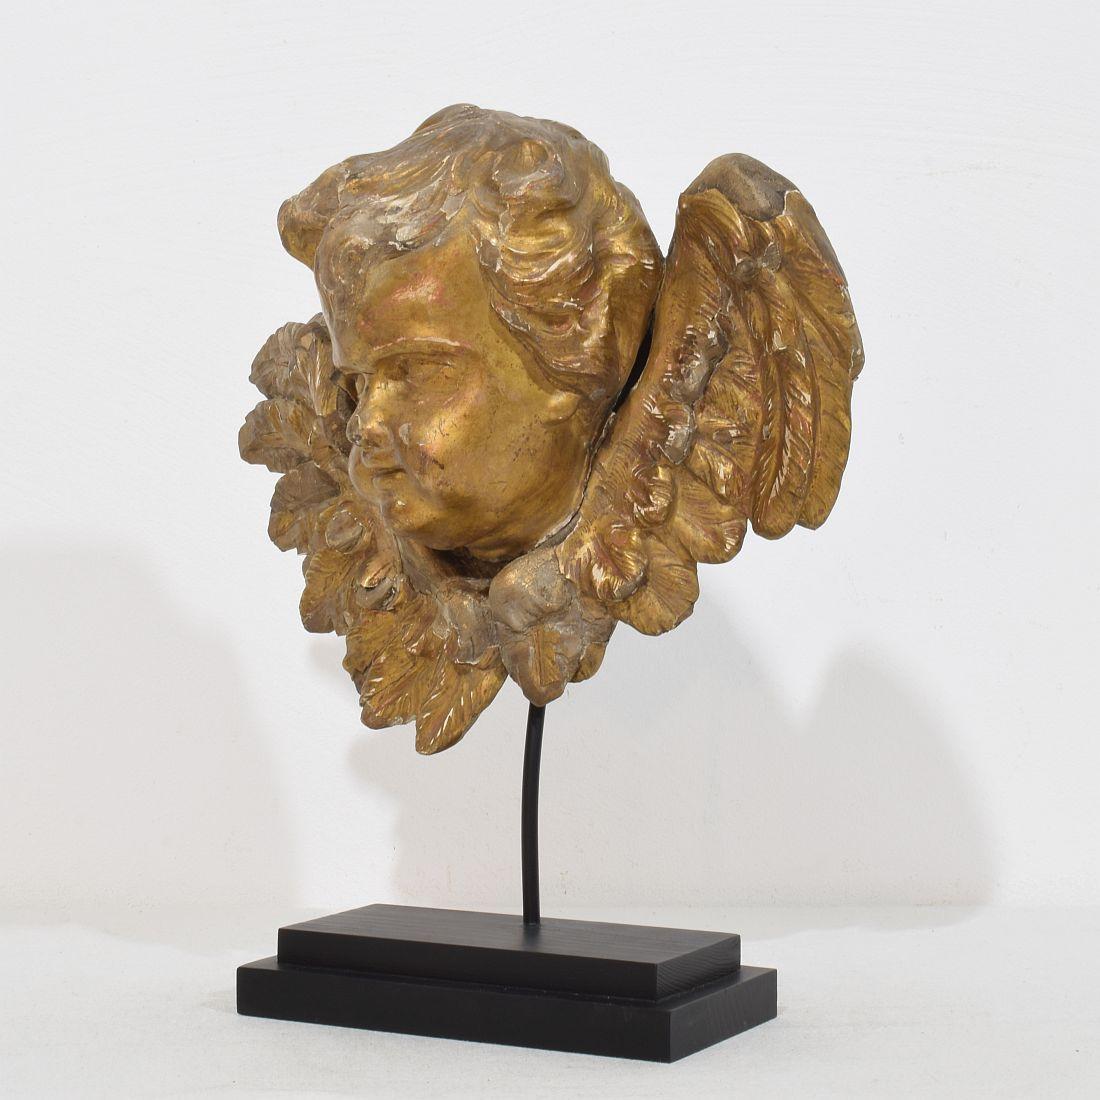 Beautiful weathered giltwood angelhead.
France, circa 1700-1750
Weathered, several losses on the gilding and old repairs which suits its high age.
Measurement here below inclusive the wooden base.

H:32cm  W:27cm D:11cm 